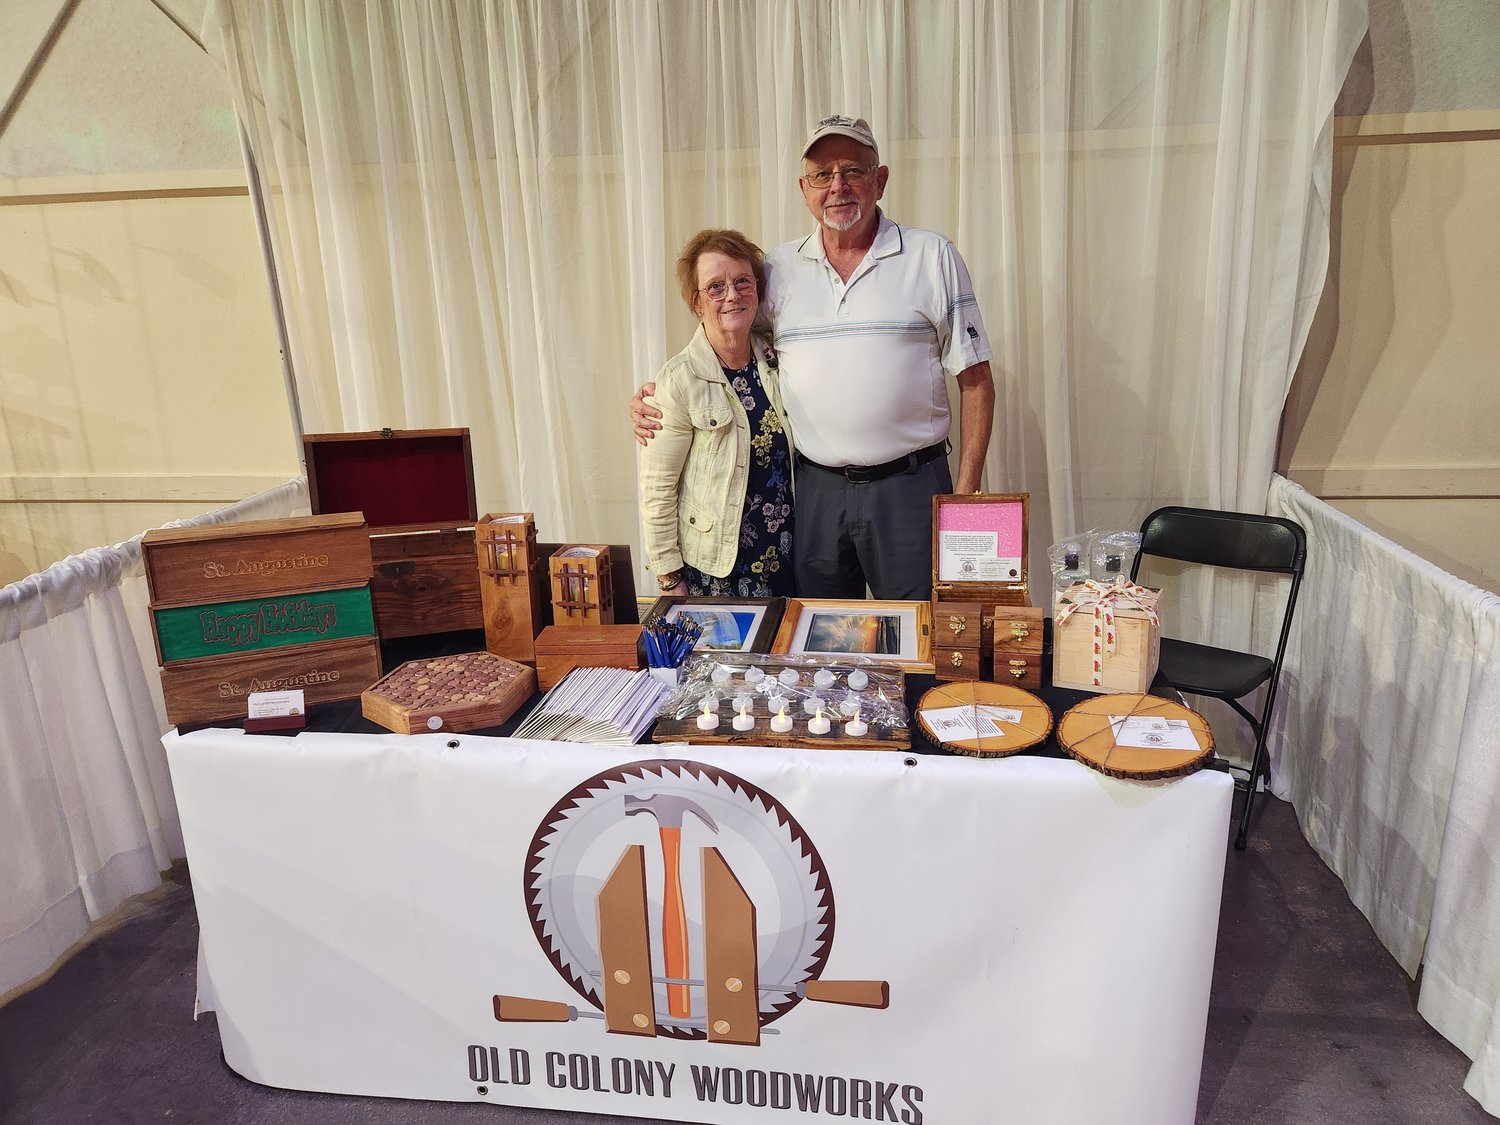 David Priest and his wife were recently a vendor at the First Coast Cultural Center’s Holiday Shoppes at the Ponte Vedra Concert Hall.